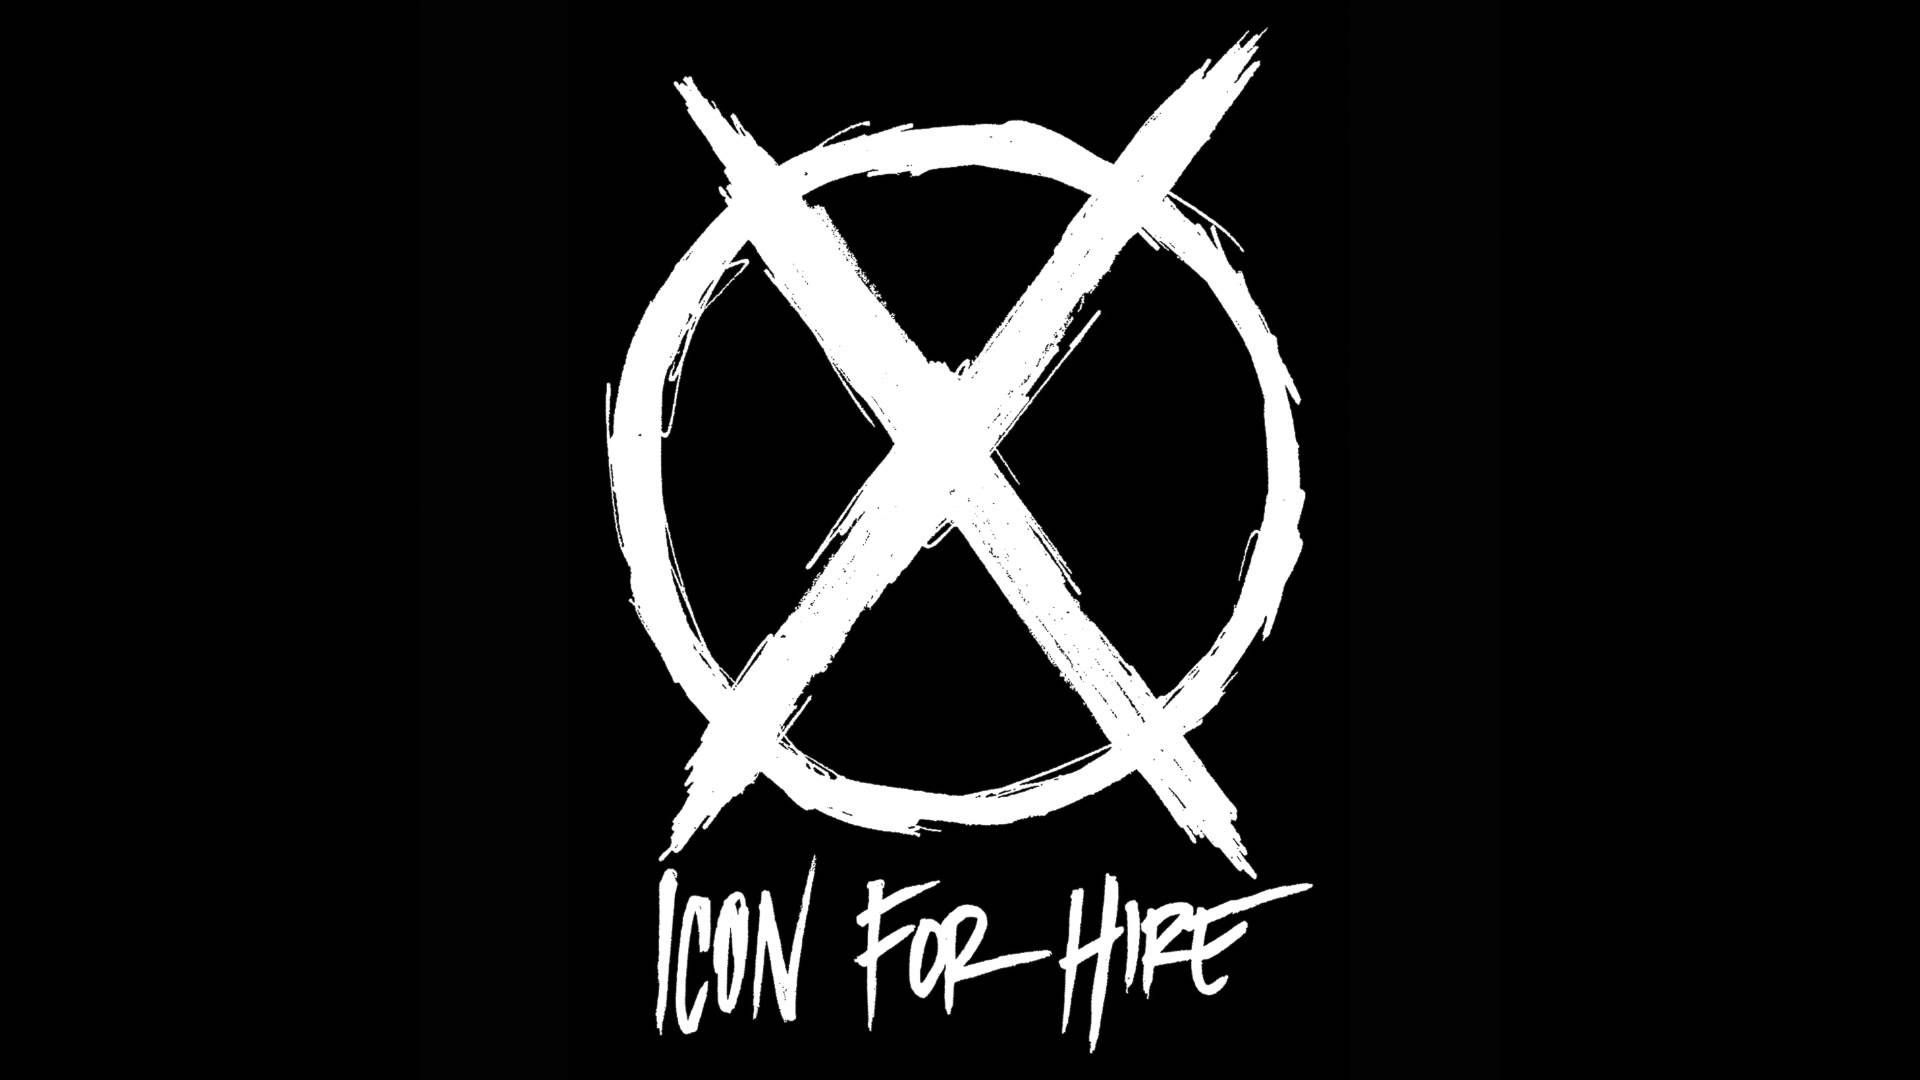 ICON FOR HIRE BAM POP (OFFICIAL AUDIO). Punk bands logos, Female punk bands, Logo sign